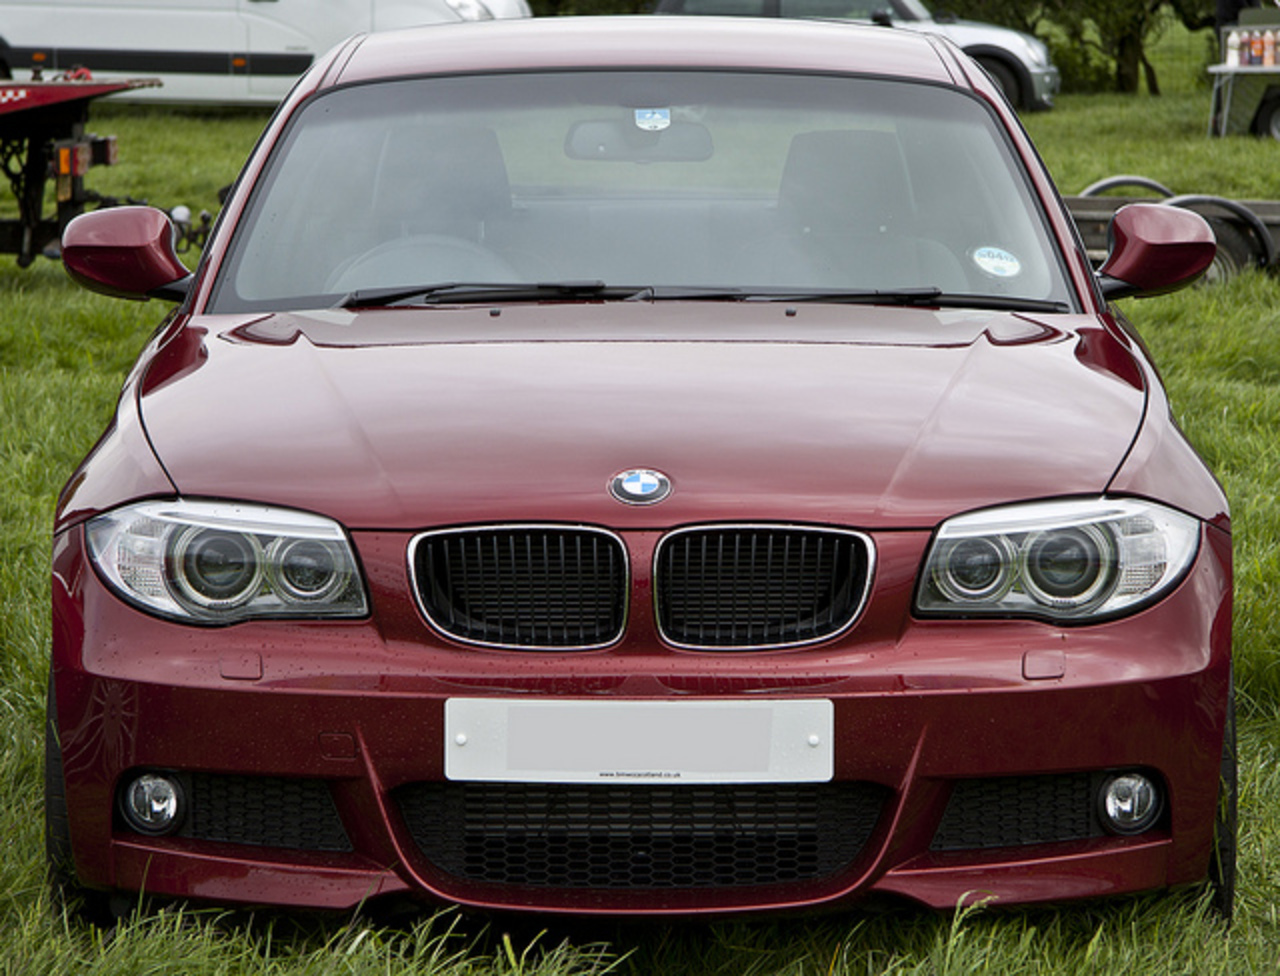 E82 BMW 123d Coupe - Front View | Flickr - Photo Sharing!